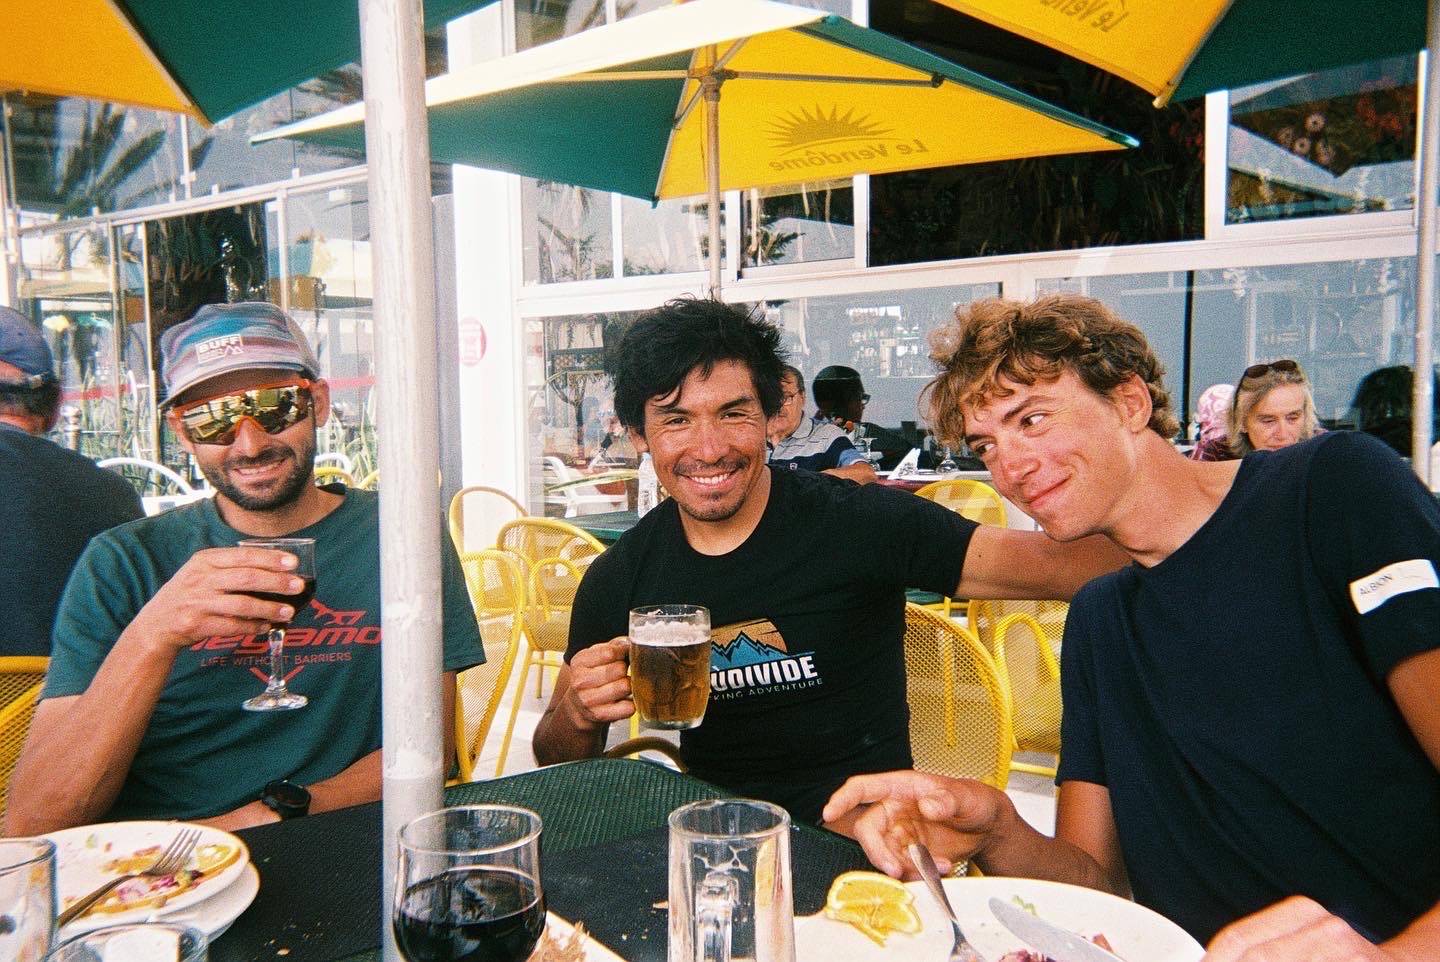 Marin and fellow racers enjoying a beer